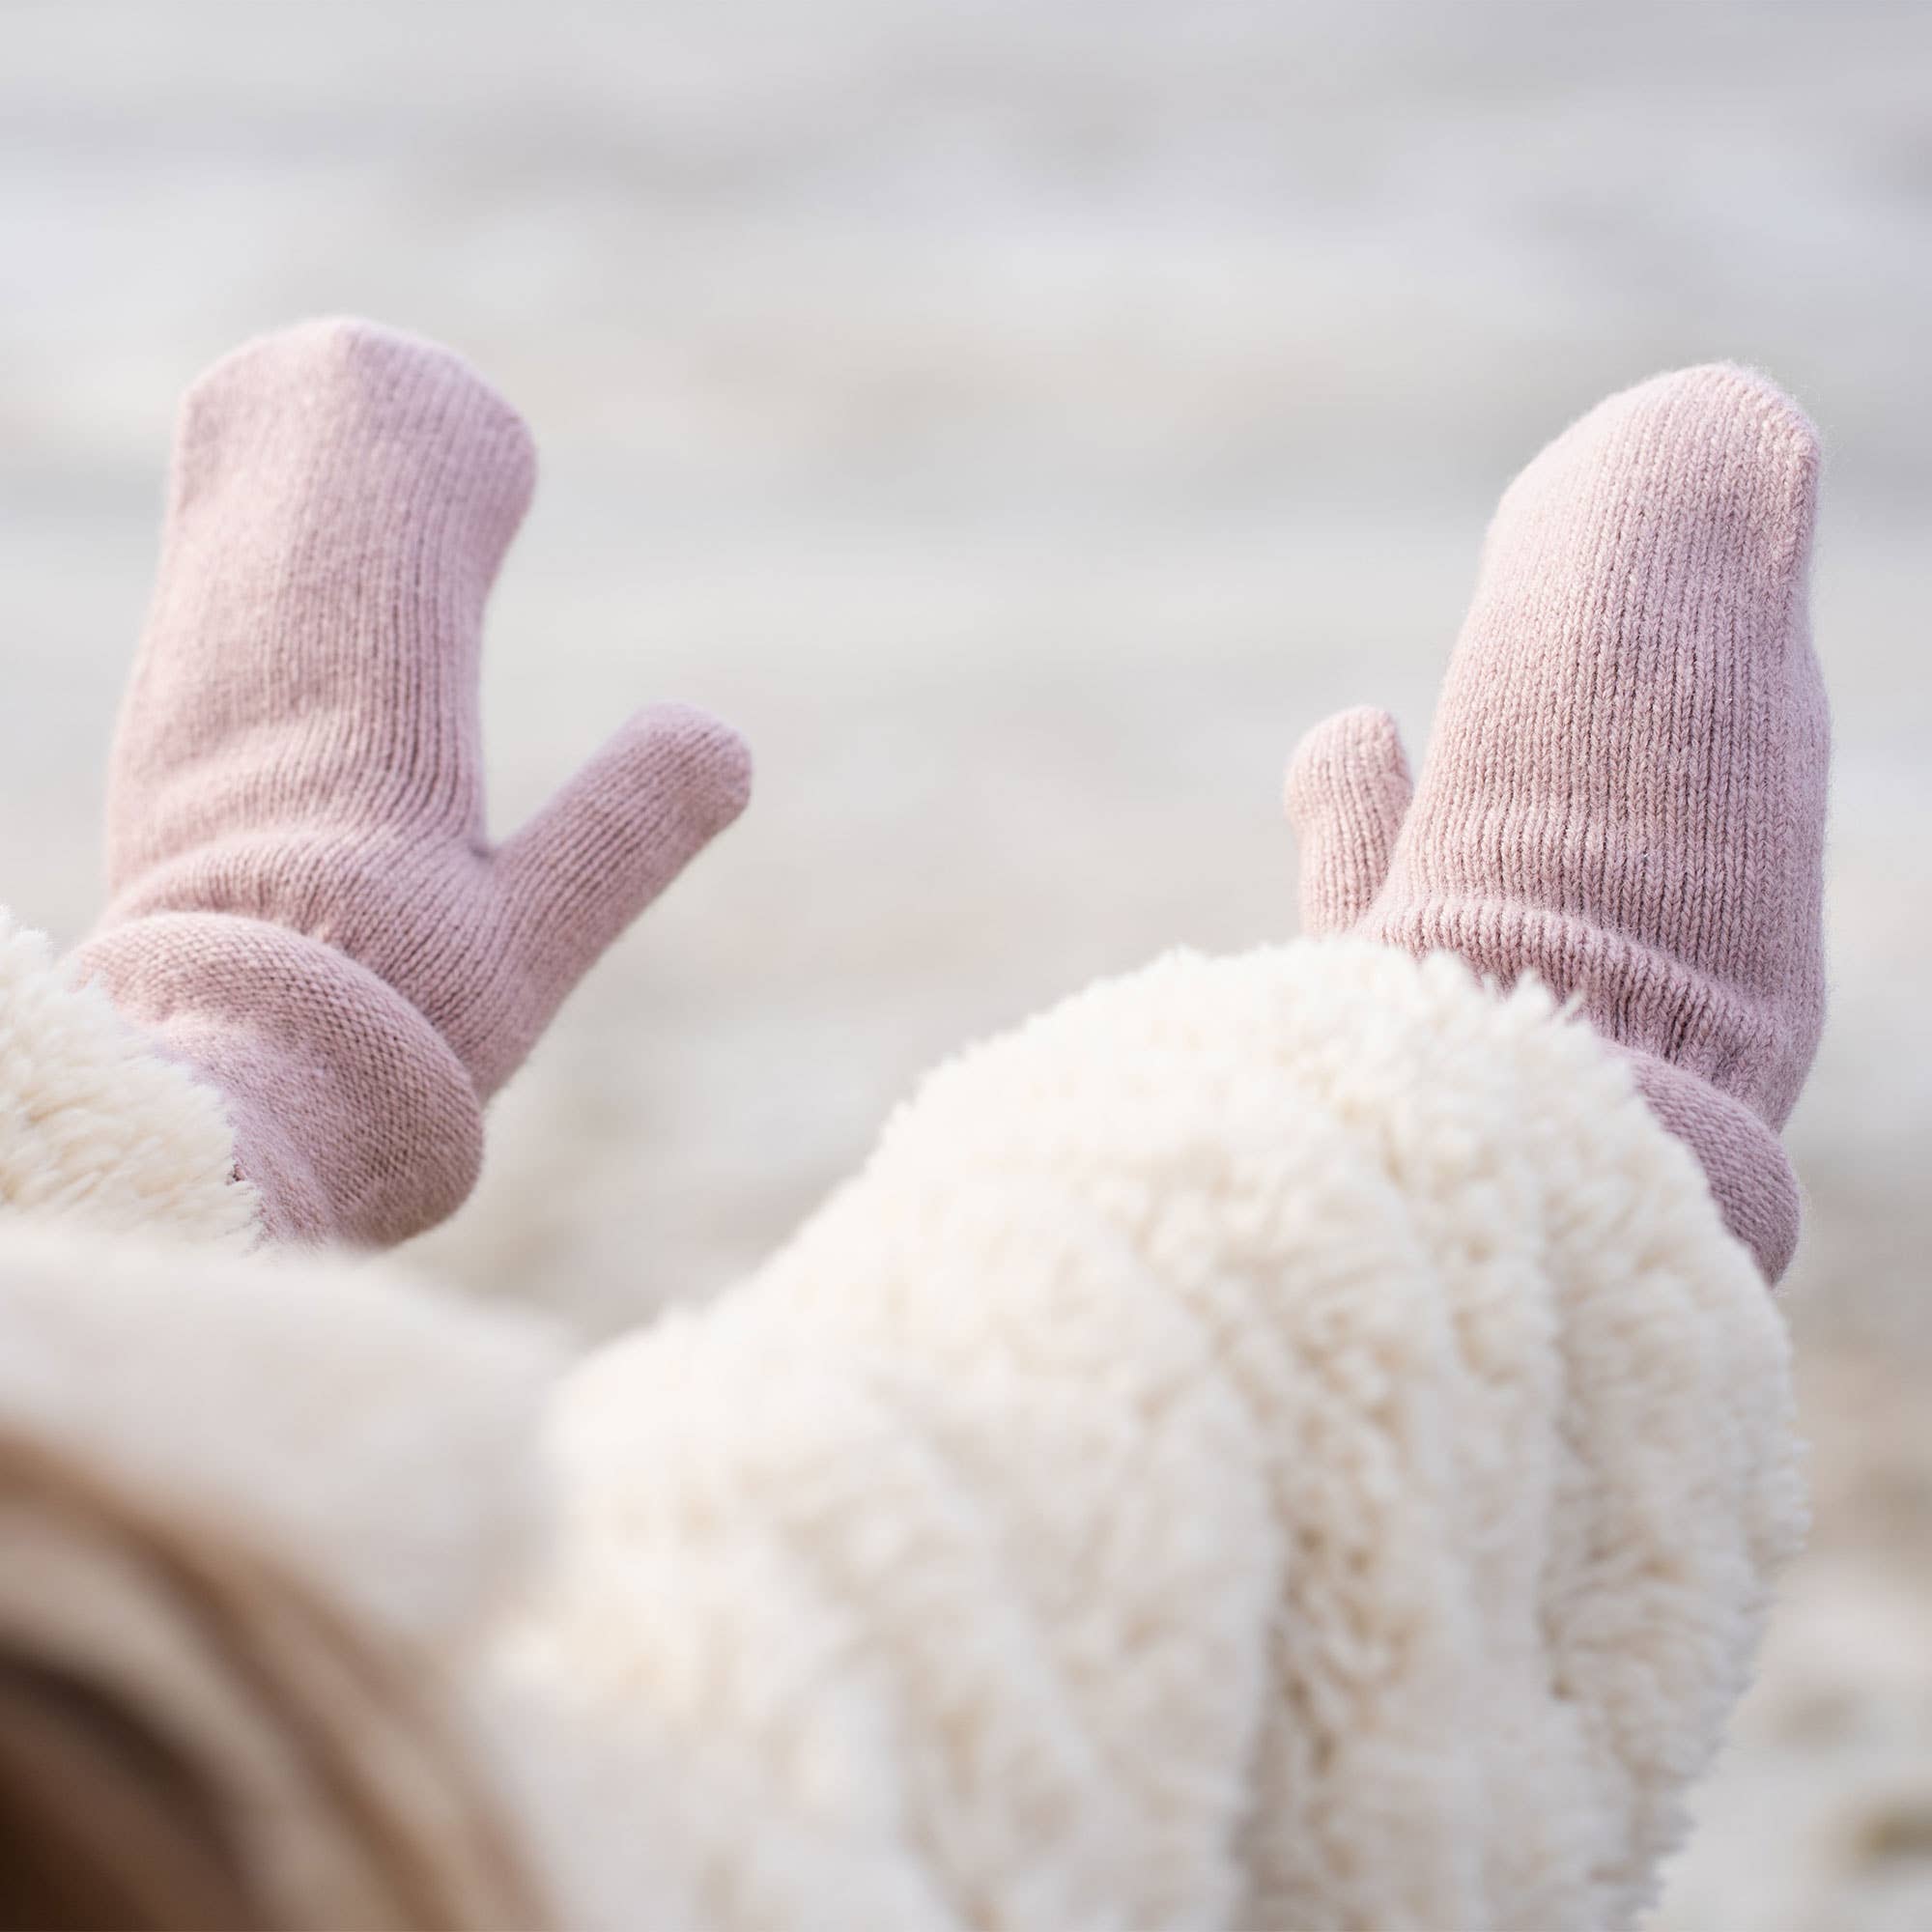 menique - Kids' Mittens Knitted Merino & Cashmere: 1-3 years / Dusty pink